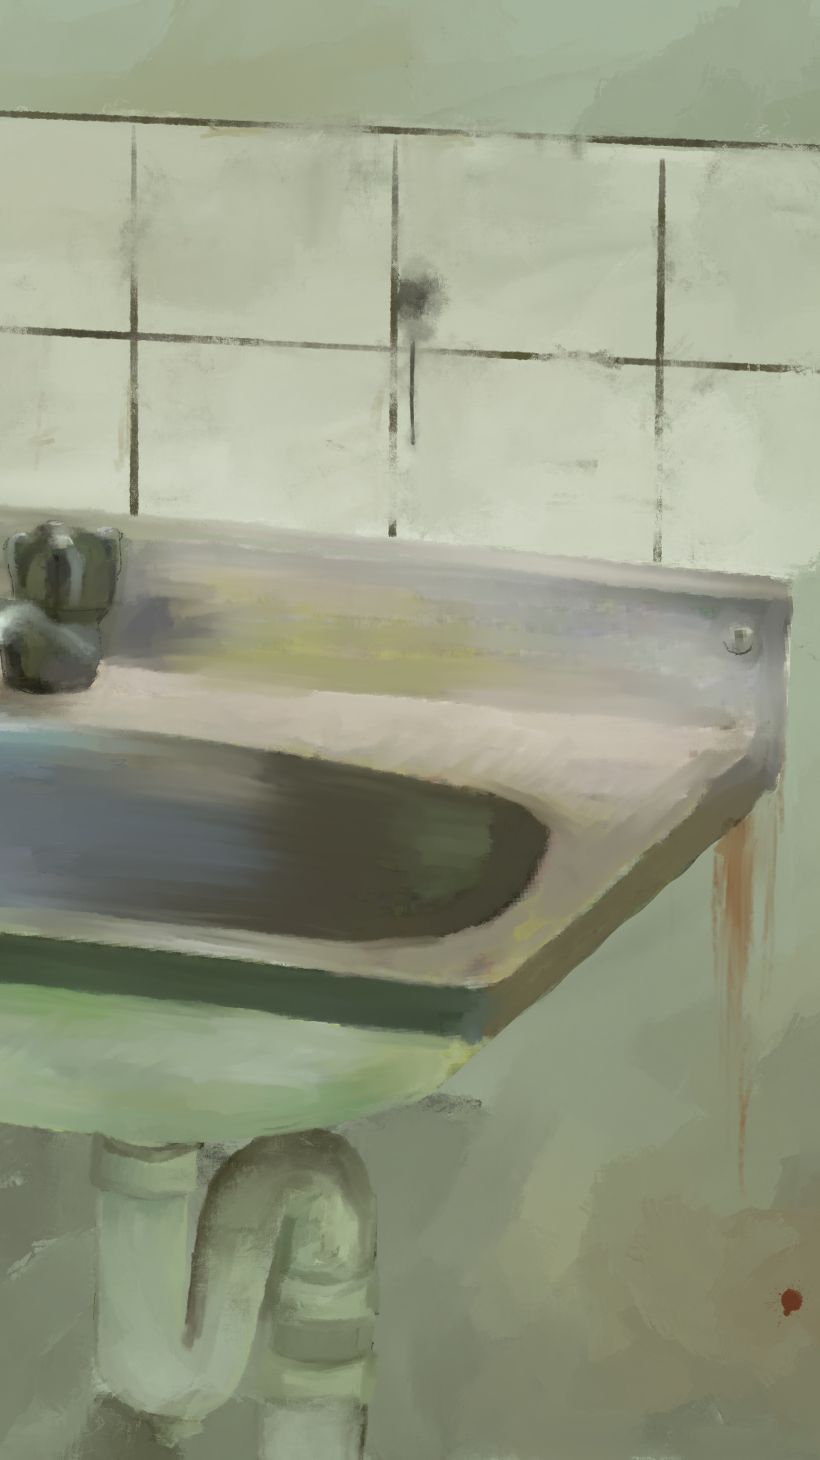 An illustration of a sink with a red handprint on the wall.